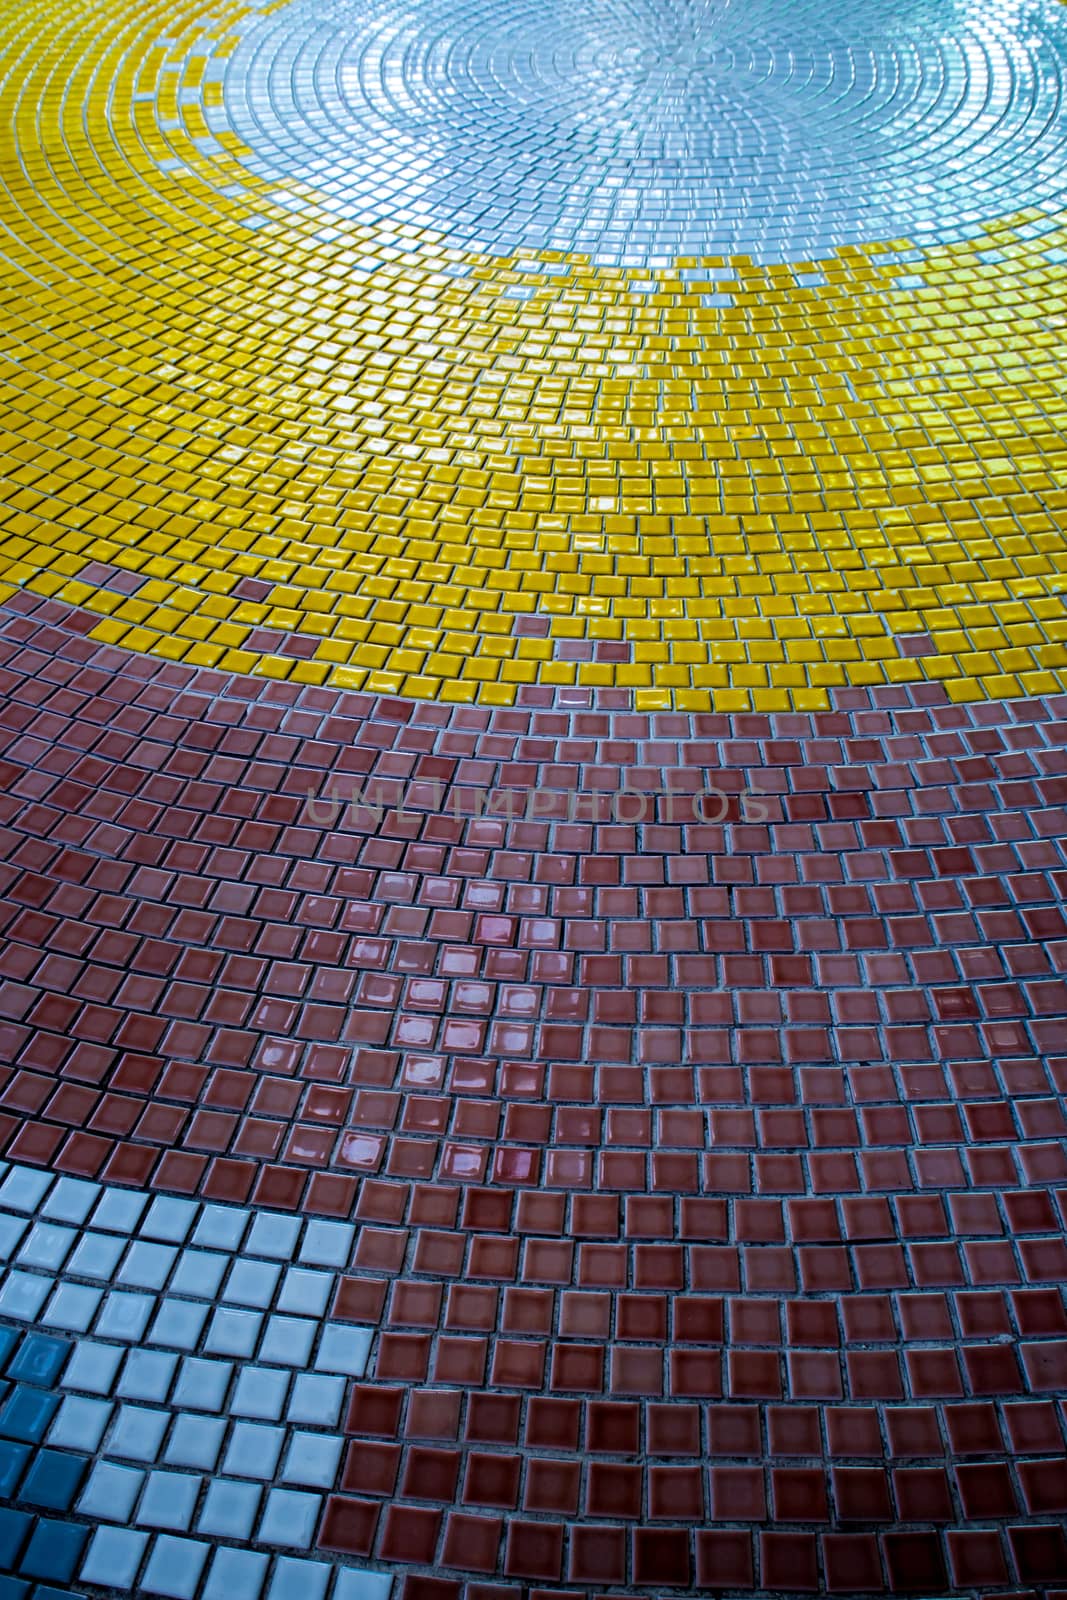 Yellow, White and Brown tiles on the floor of hall